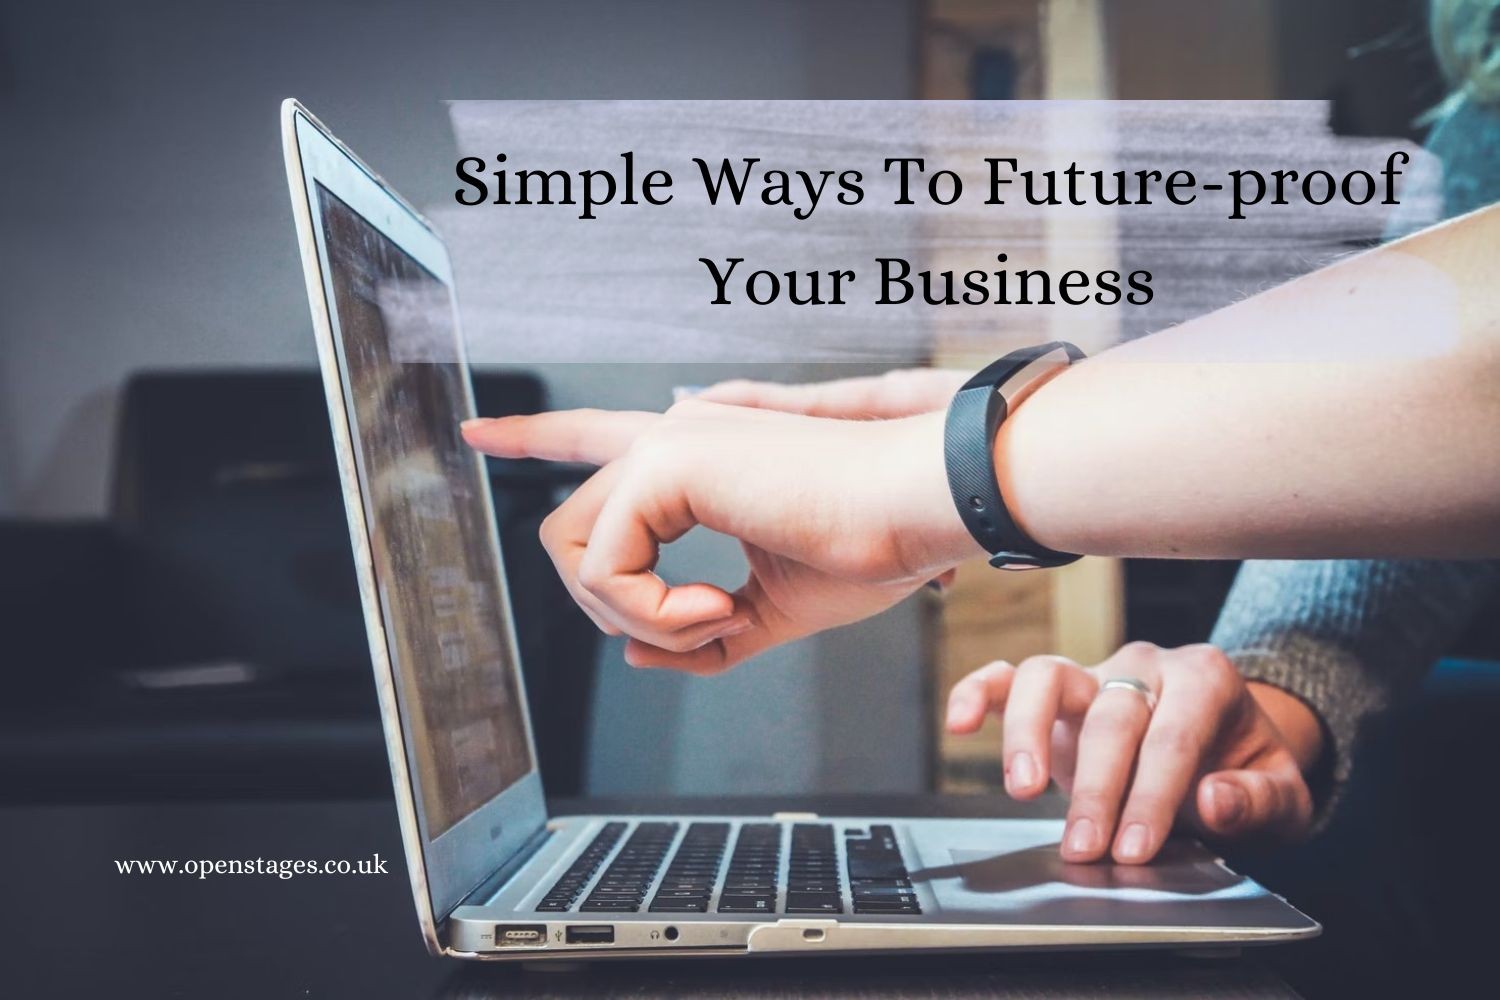 5 Simple Ways To Future-proof Your Business